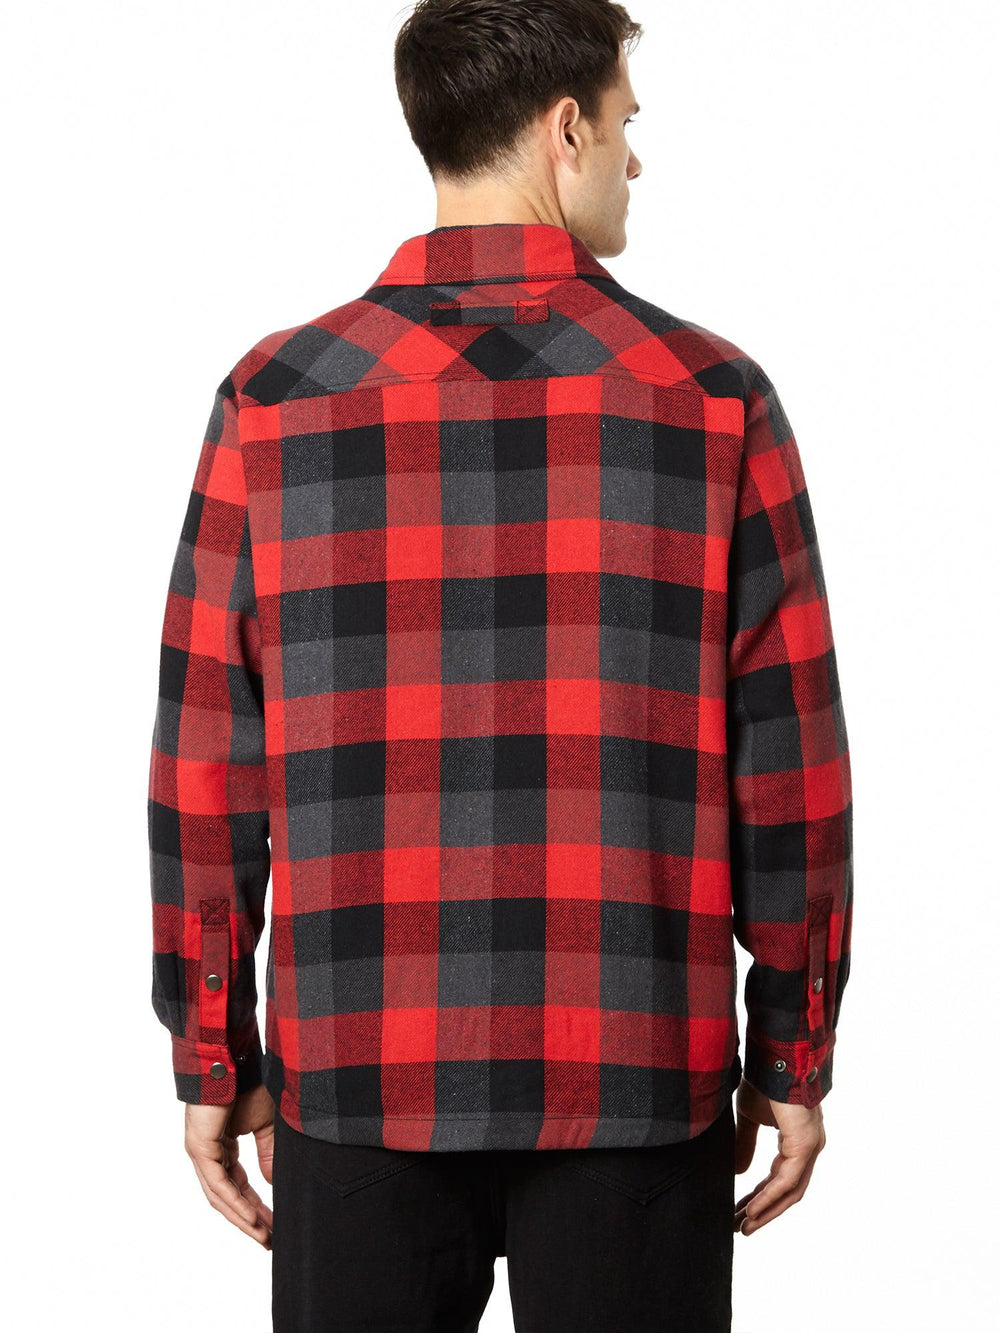 JIMMY PLAID QUILTED FLANNEL JACKET